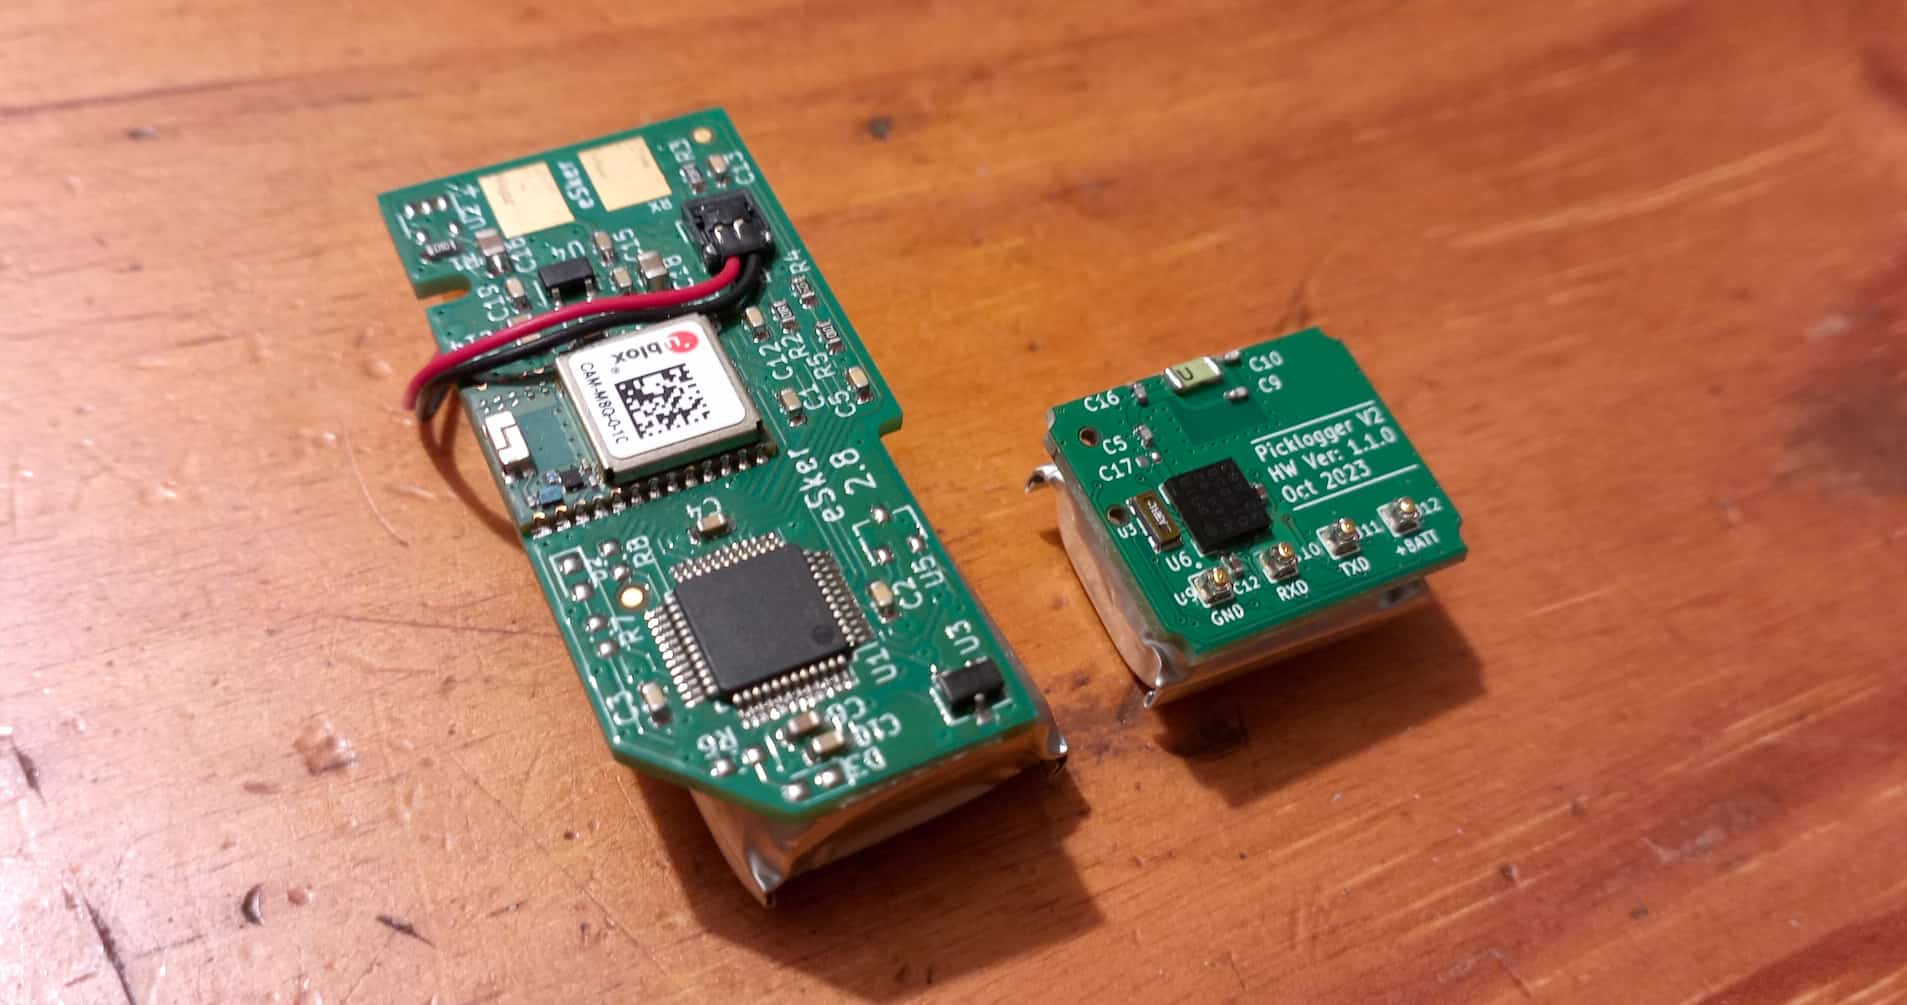 The V1 PCB and battery next to the V2 PCB and battery.